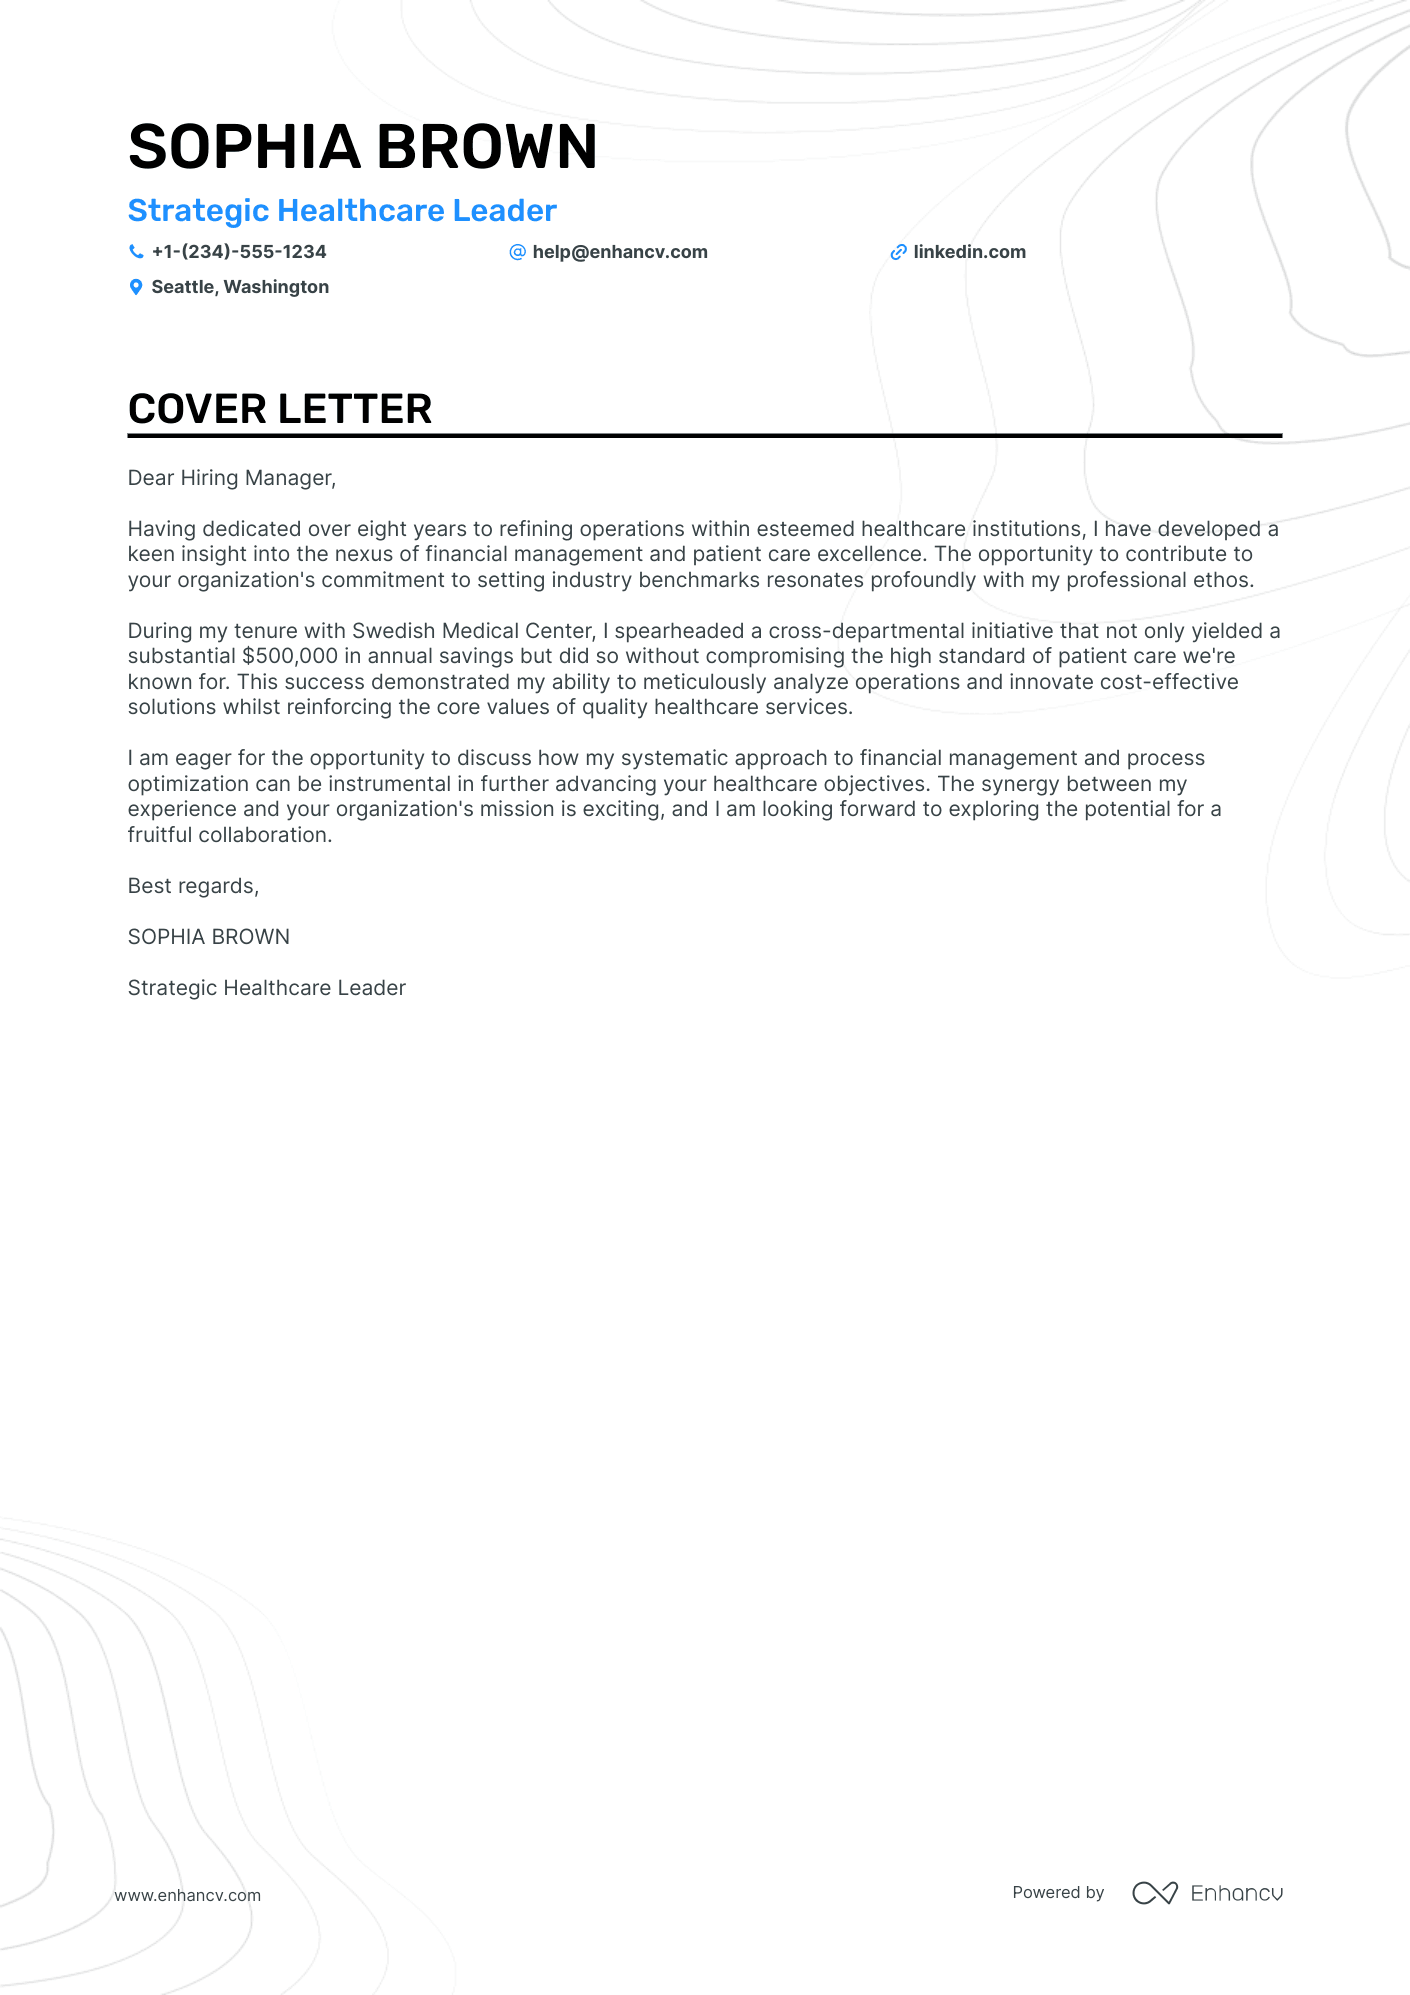 operations manager job application cover letter